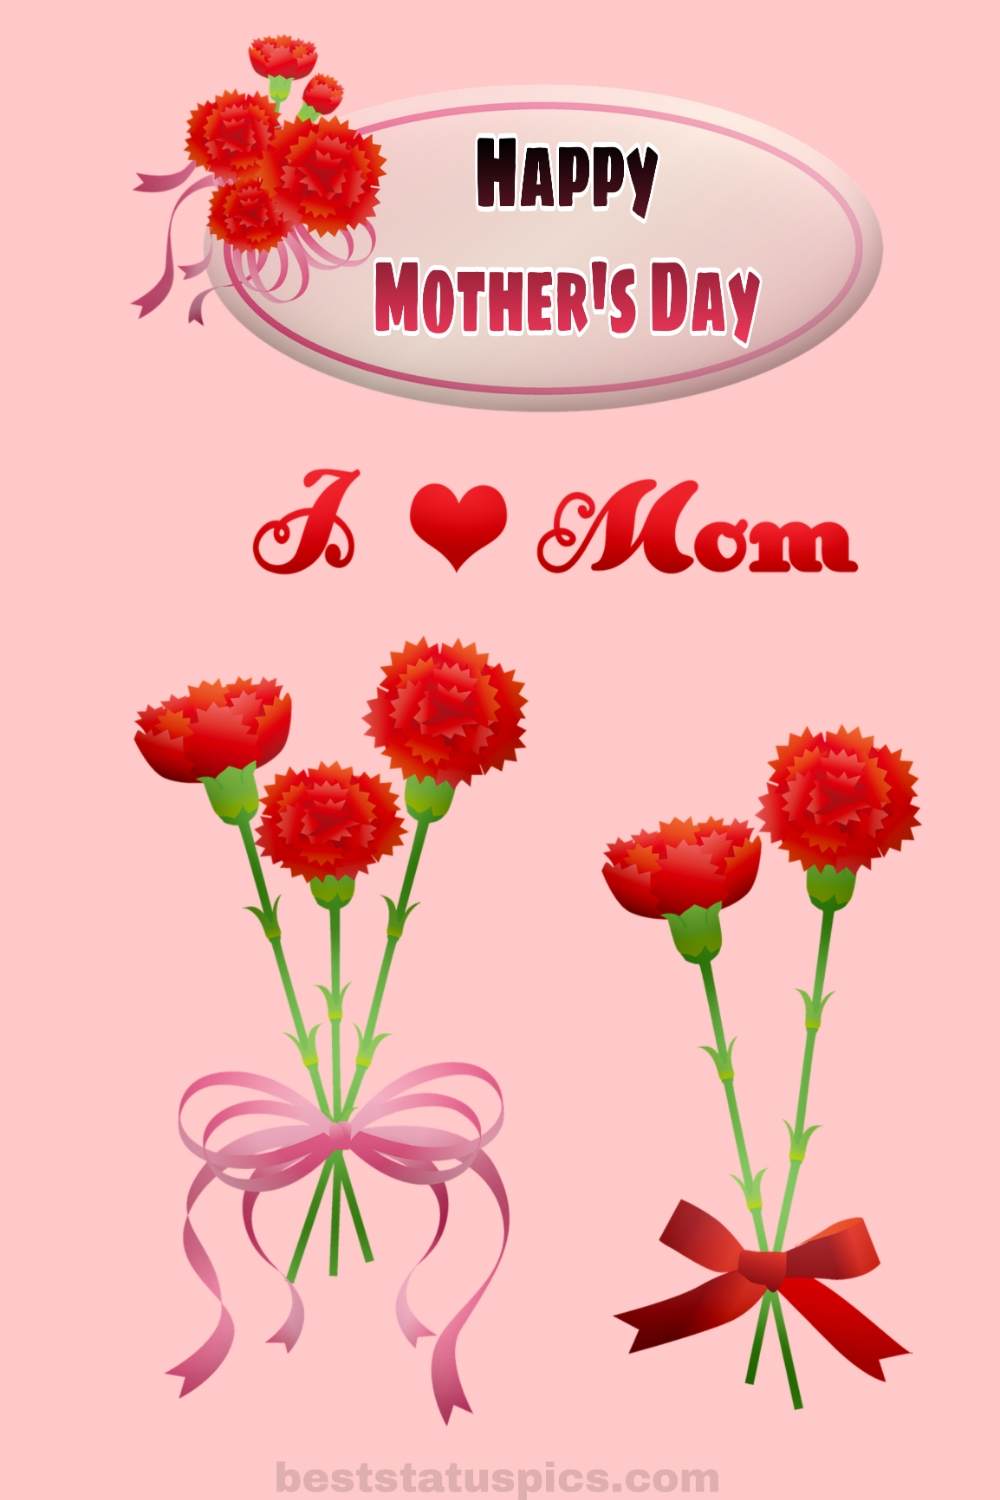 Beautiful Happy mother's day 2022 cards with roses and I love you mom quote